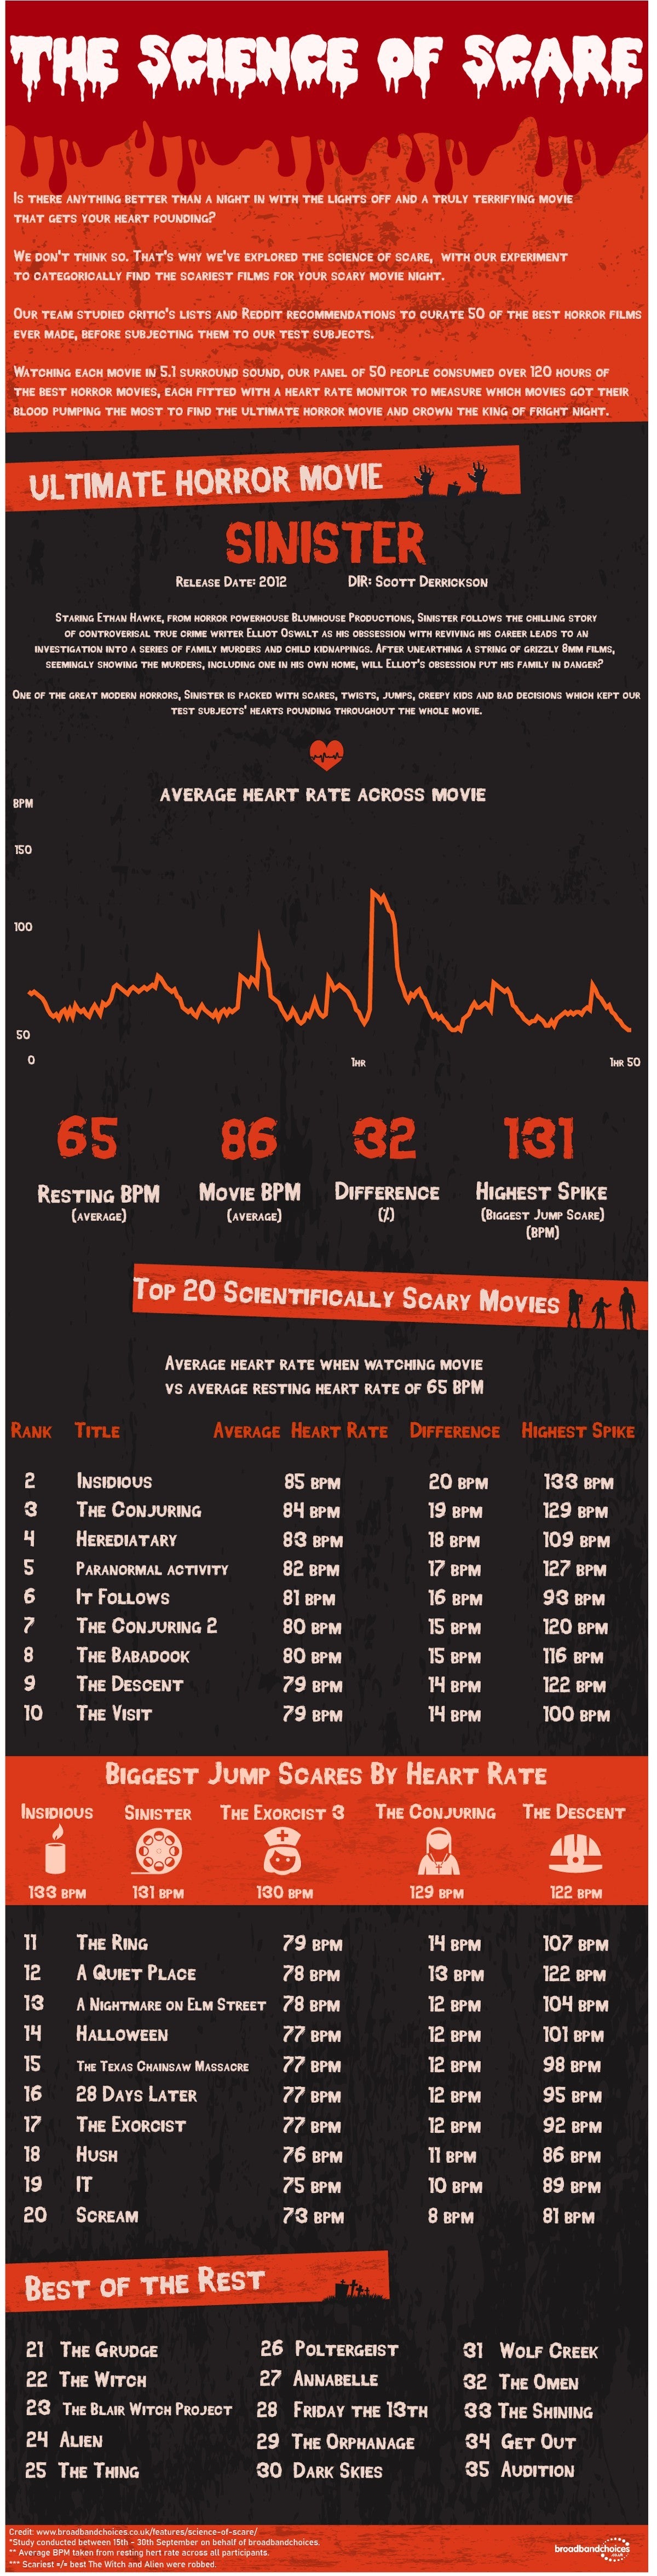 Scientific Study Names Sinister as Scariest Movie Ever Based on Heartrate Monitoring